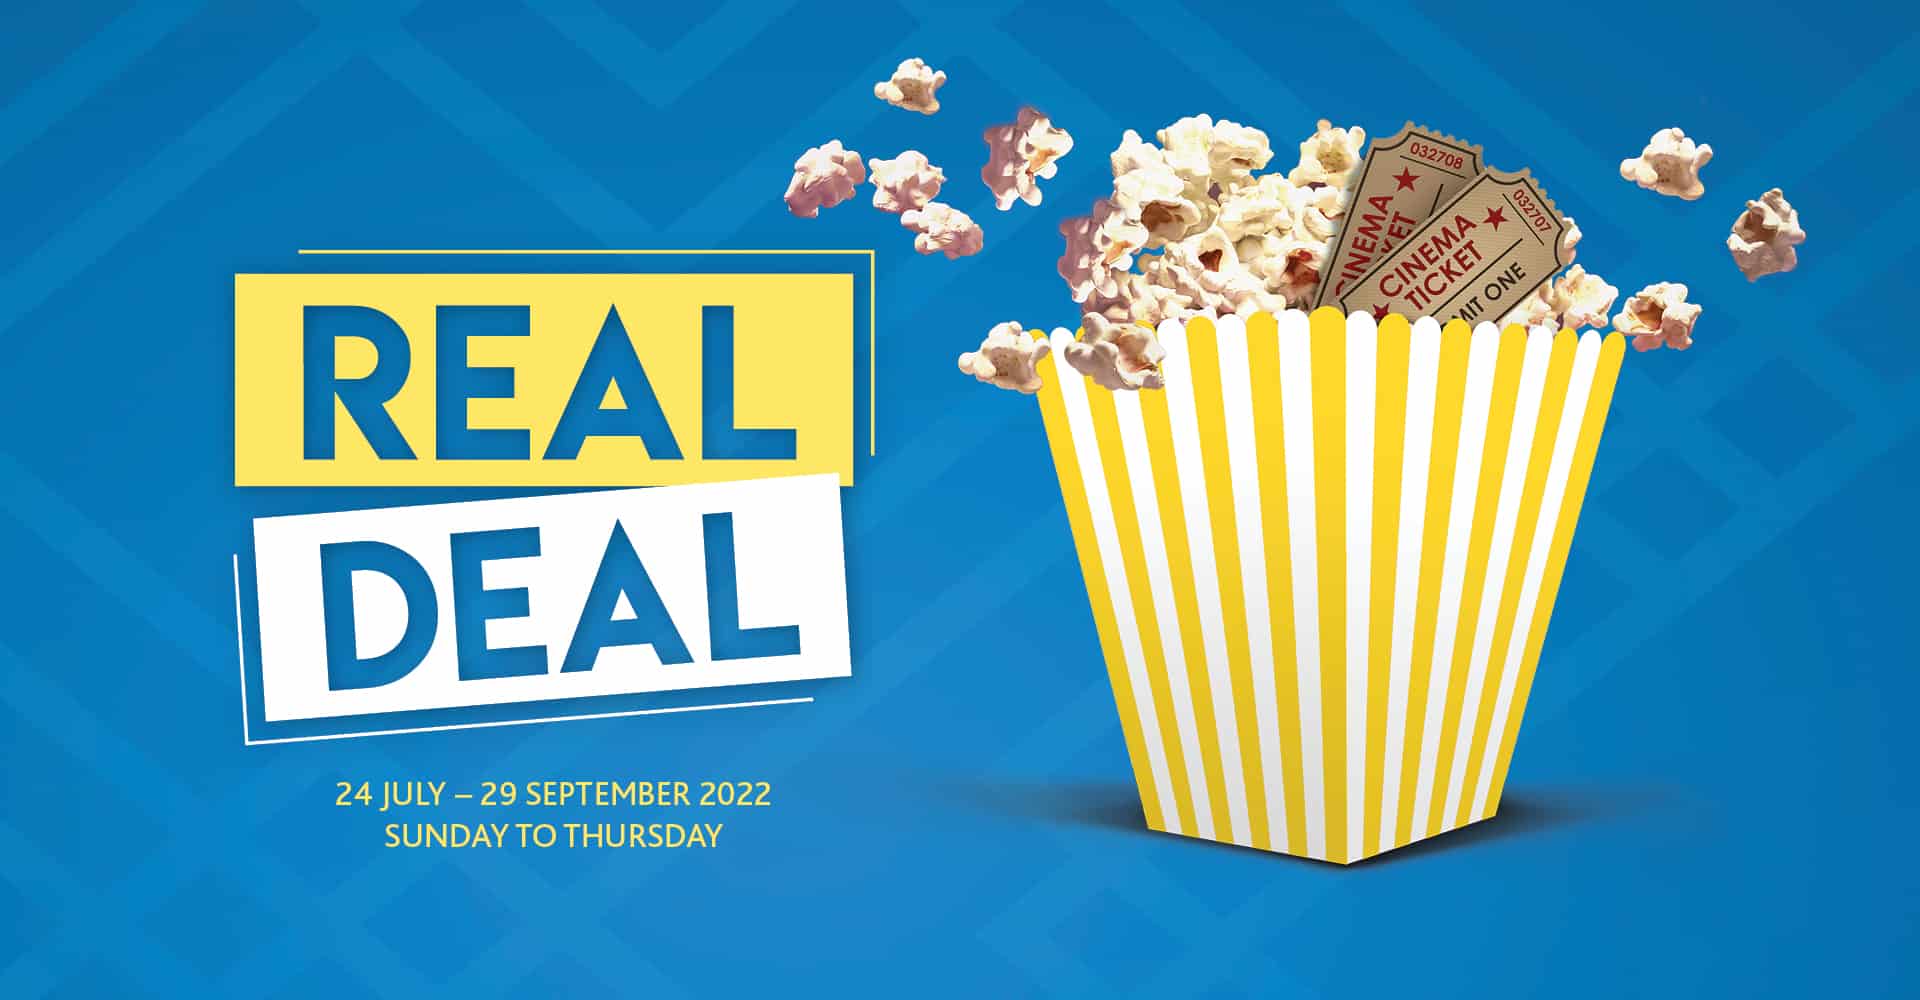 Real Deal is back at Suncoast!